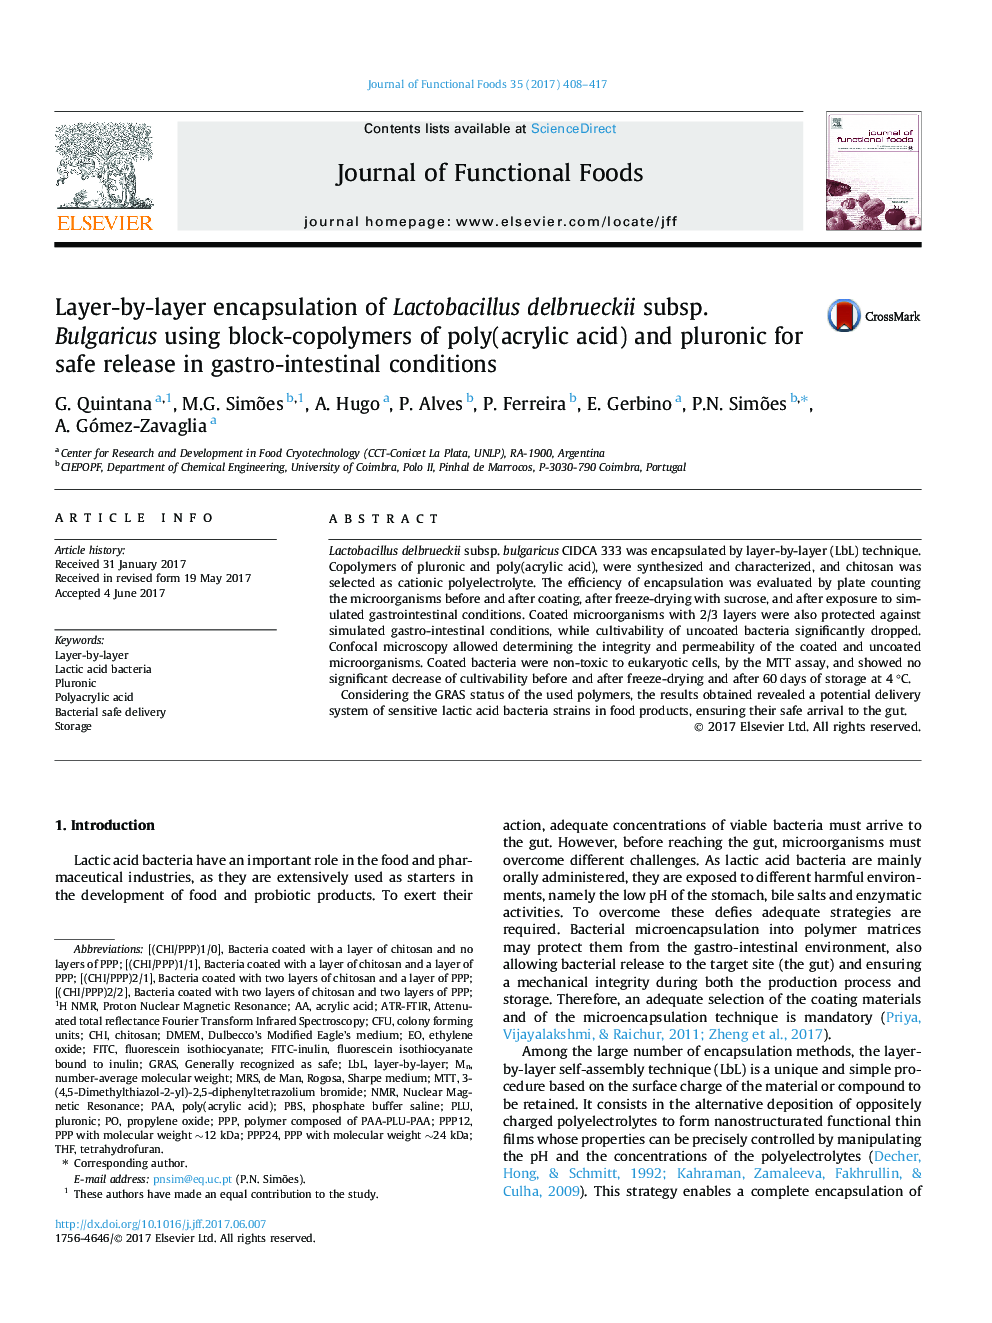 Layer-by-layer encapsulation of Lactobacillus delbrueckii subsp. Bulgaricus using block-copolymers of poly(acrylic acid) and pluronic for safe release in gastro-intestinal conditions